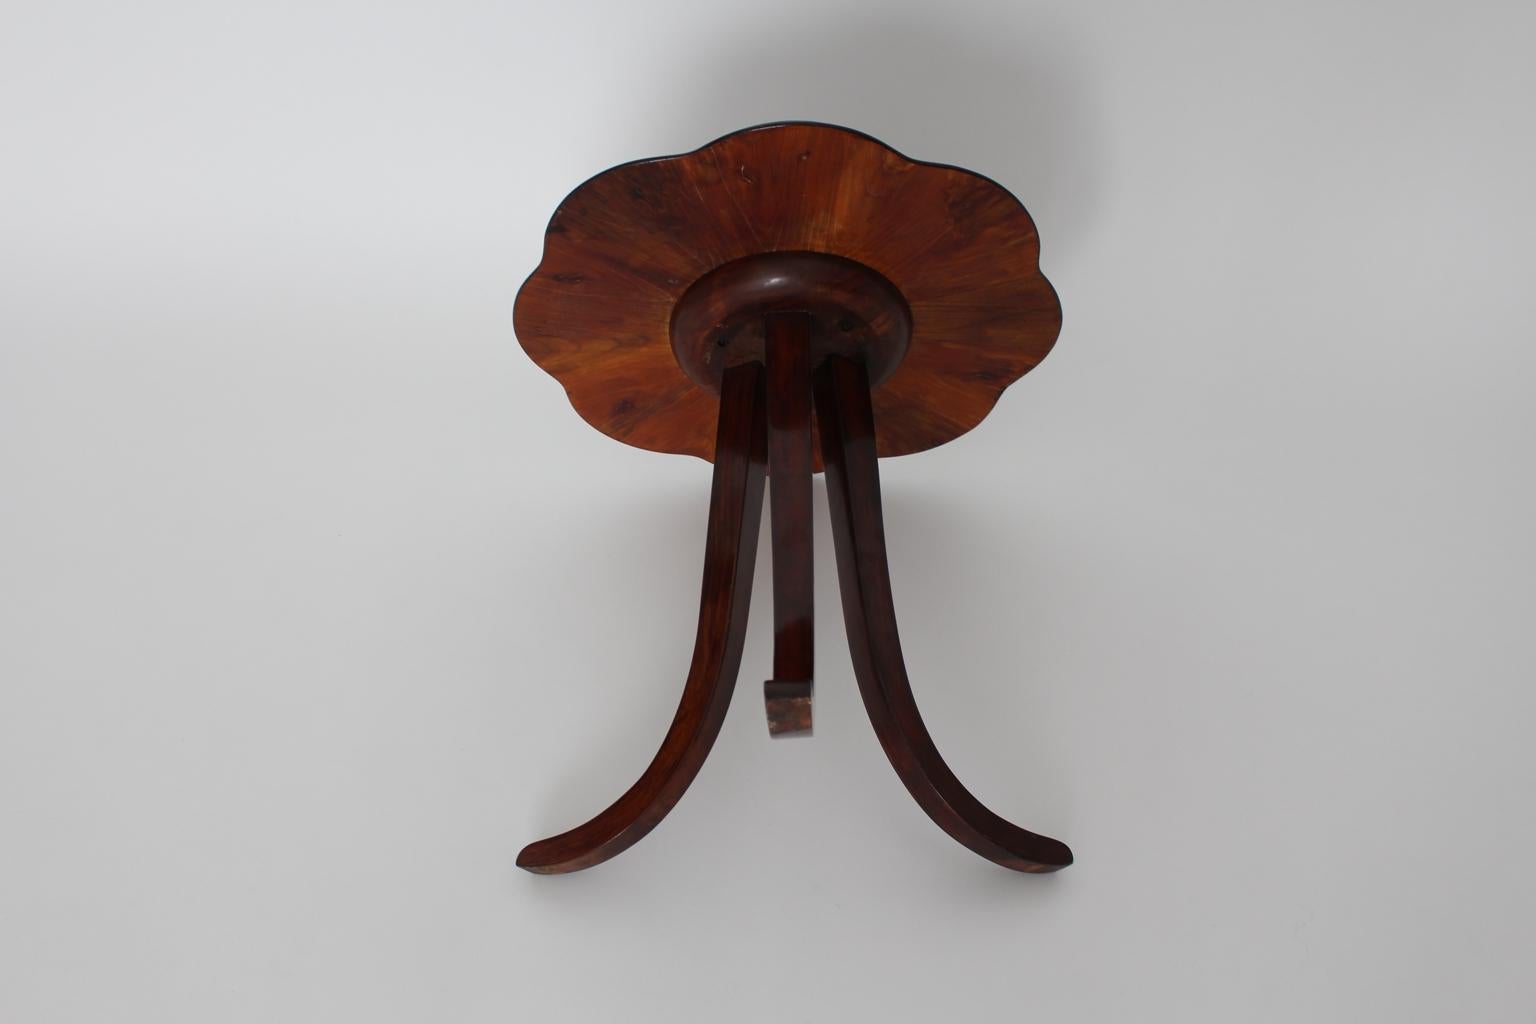 Art Deco Walnut Side Table or Coffee Table by Josef Frank for Thonet, circa 1925 For Sale 8